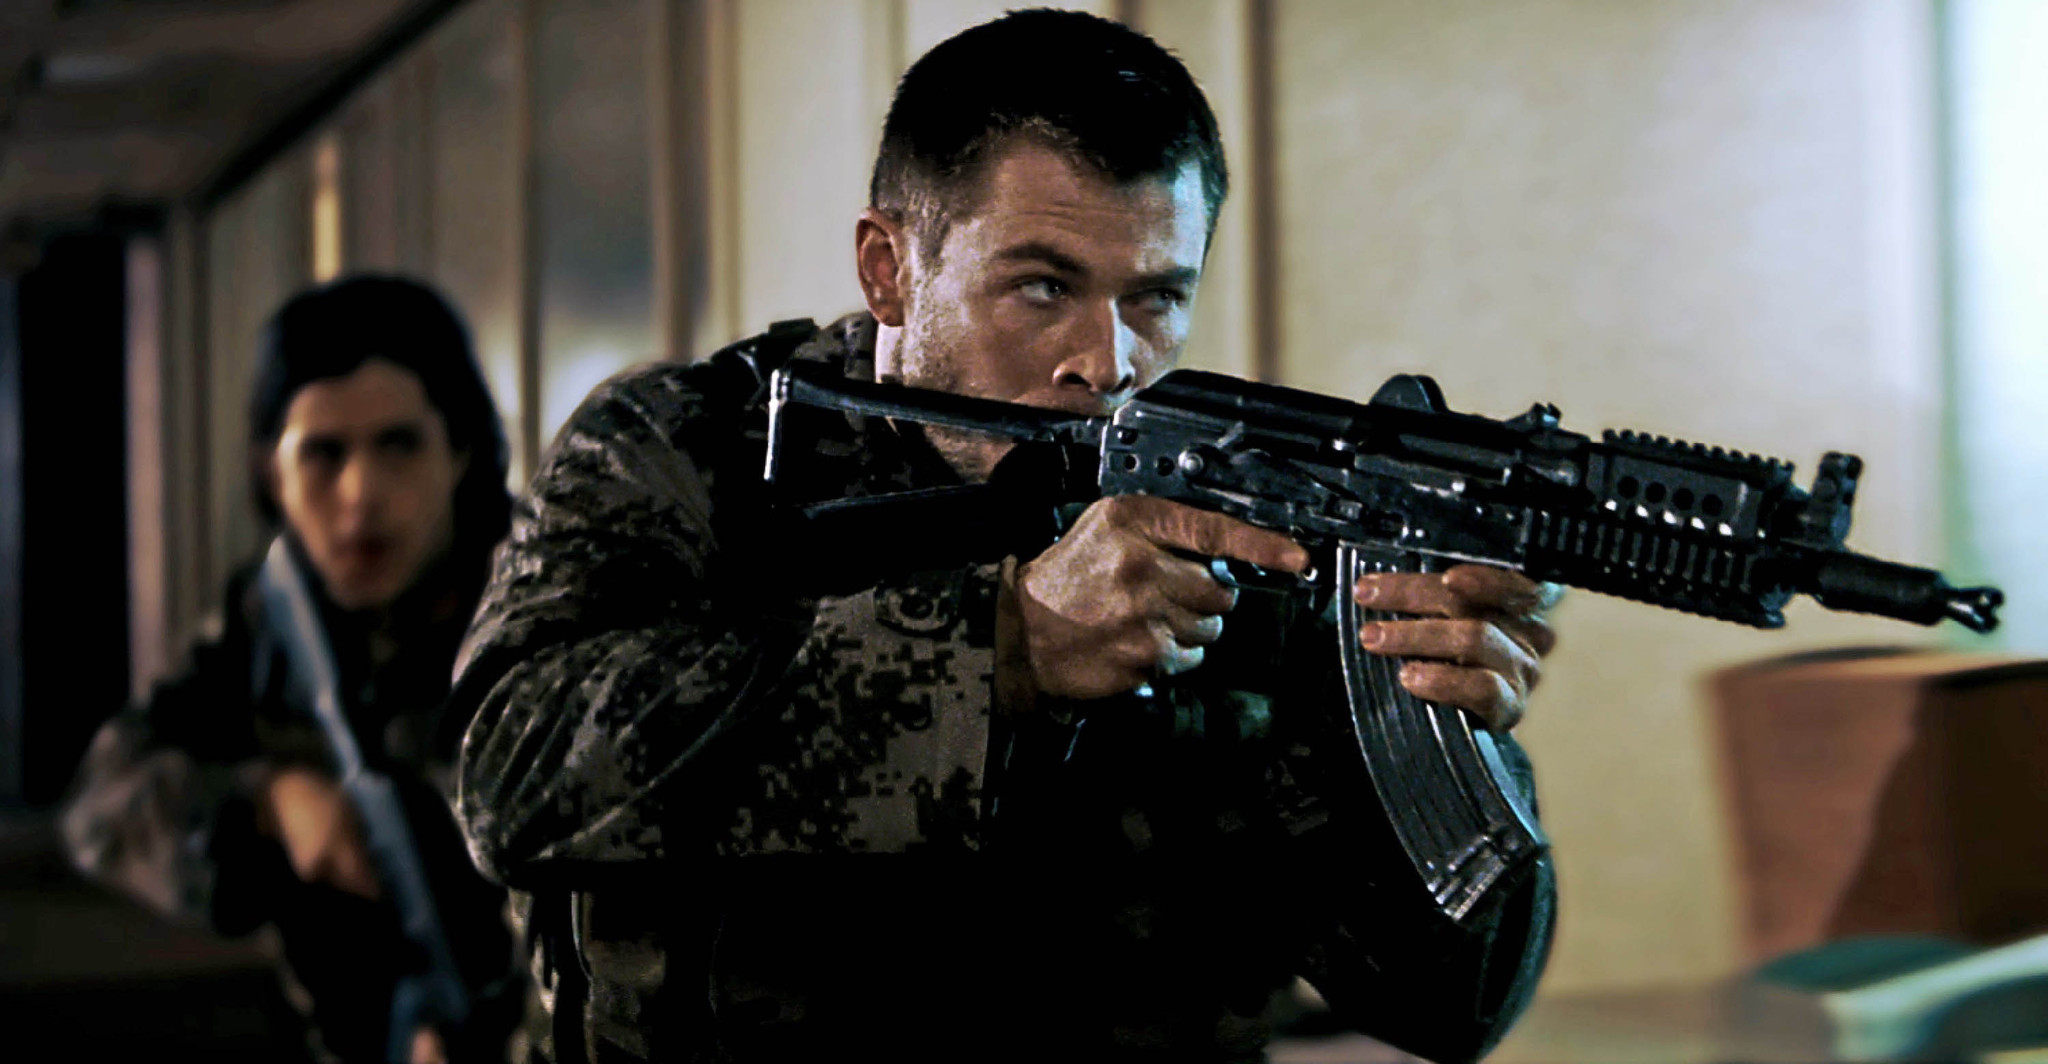 Chris Hemsworth in a still from Red Dawn (2012).